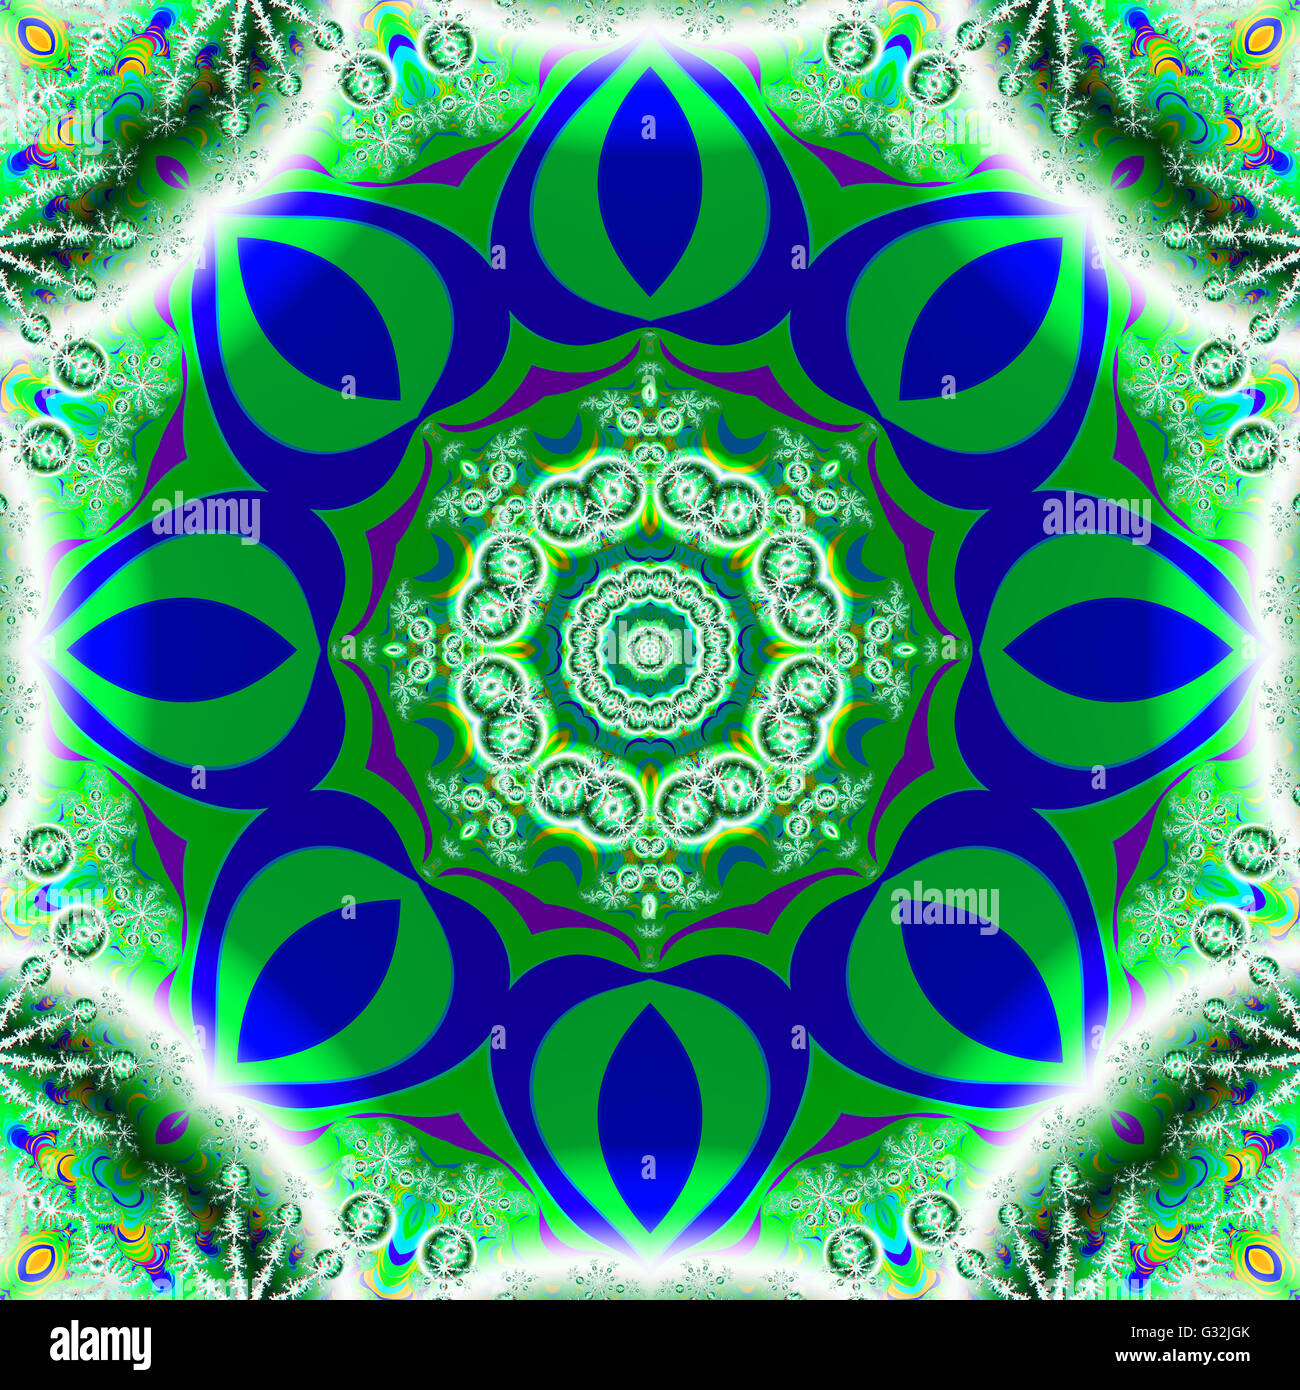 Geometrical fractal image in a vibrant green and blue octagonal shape Stock Photo